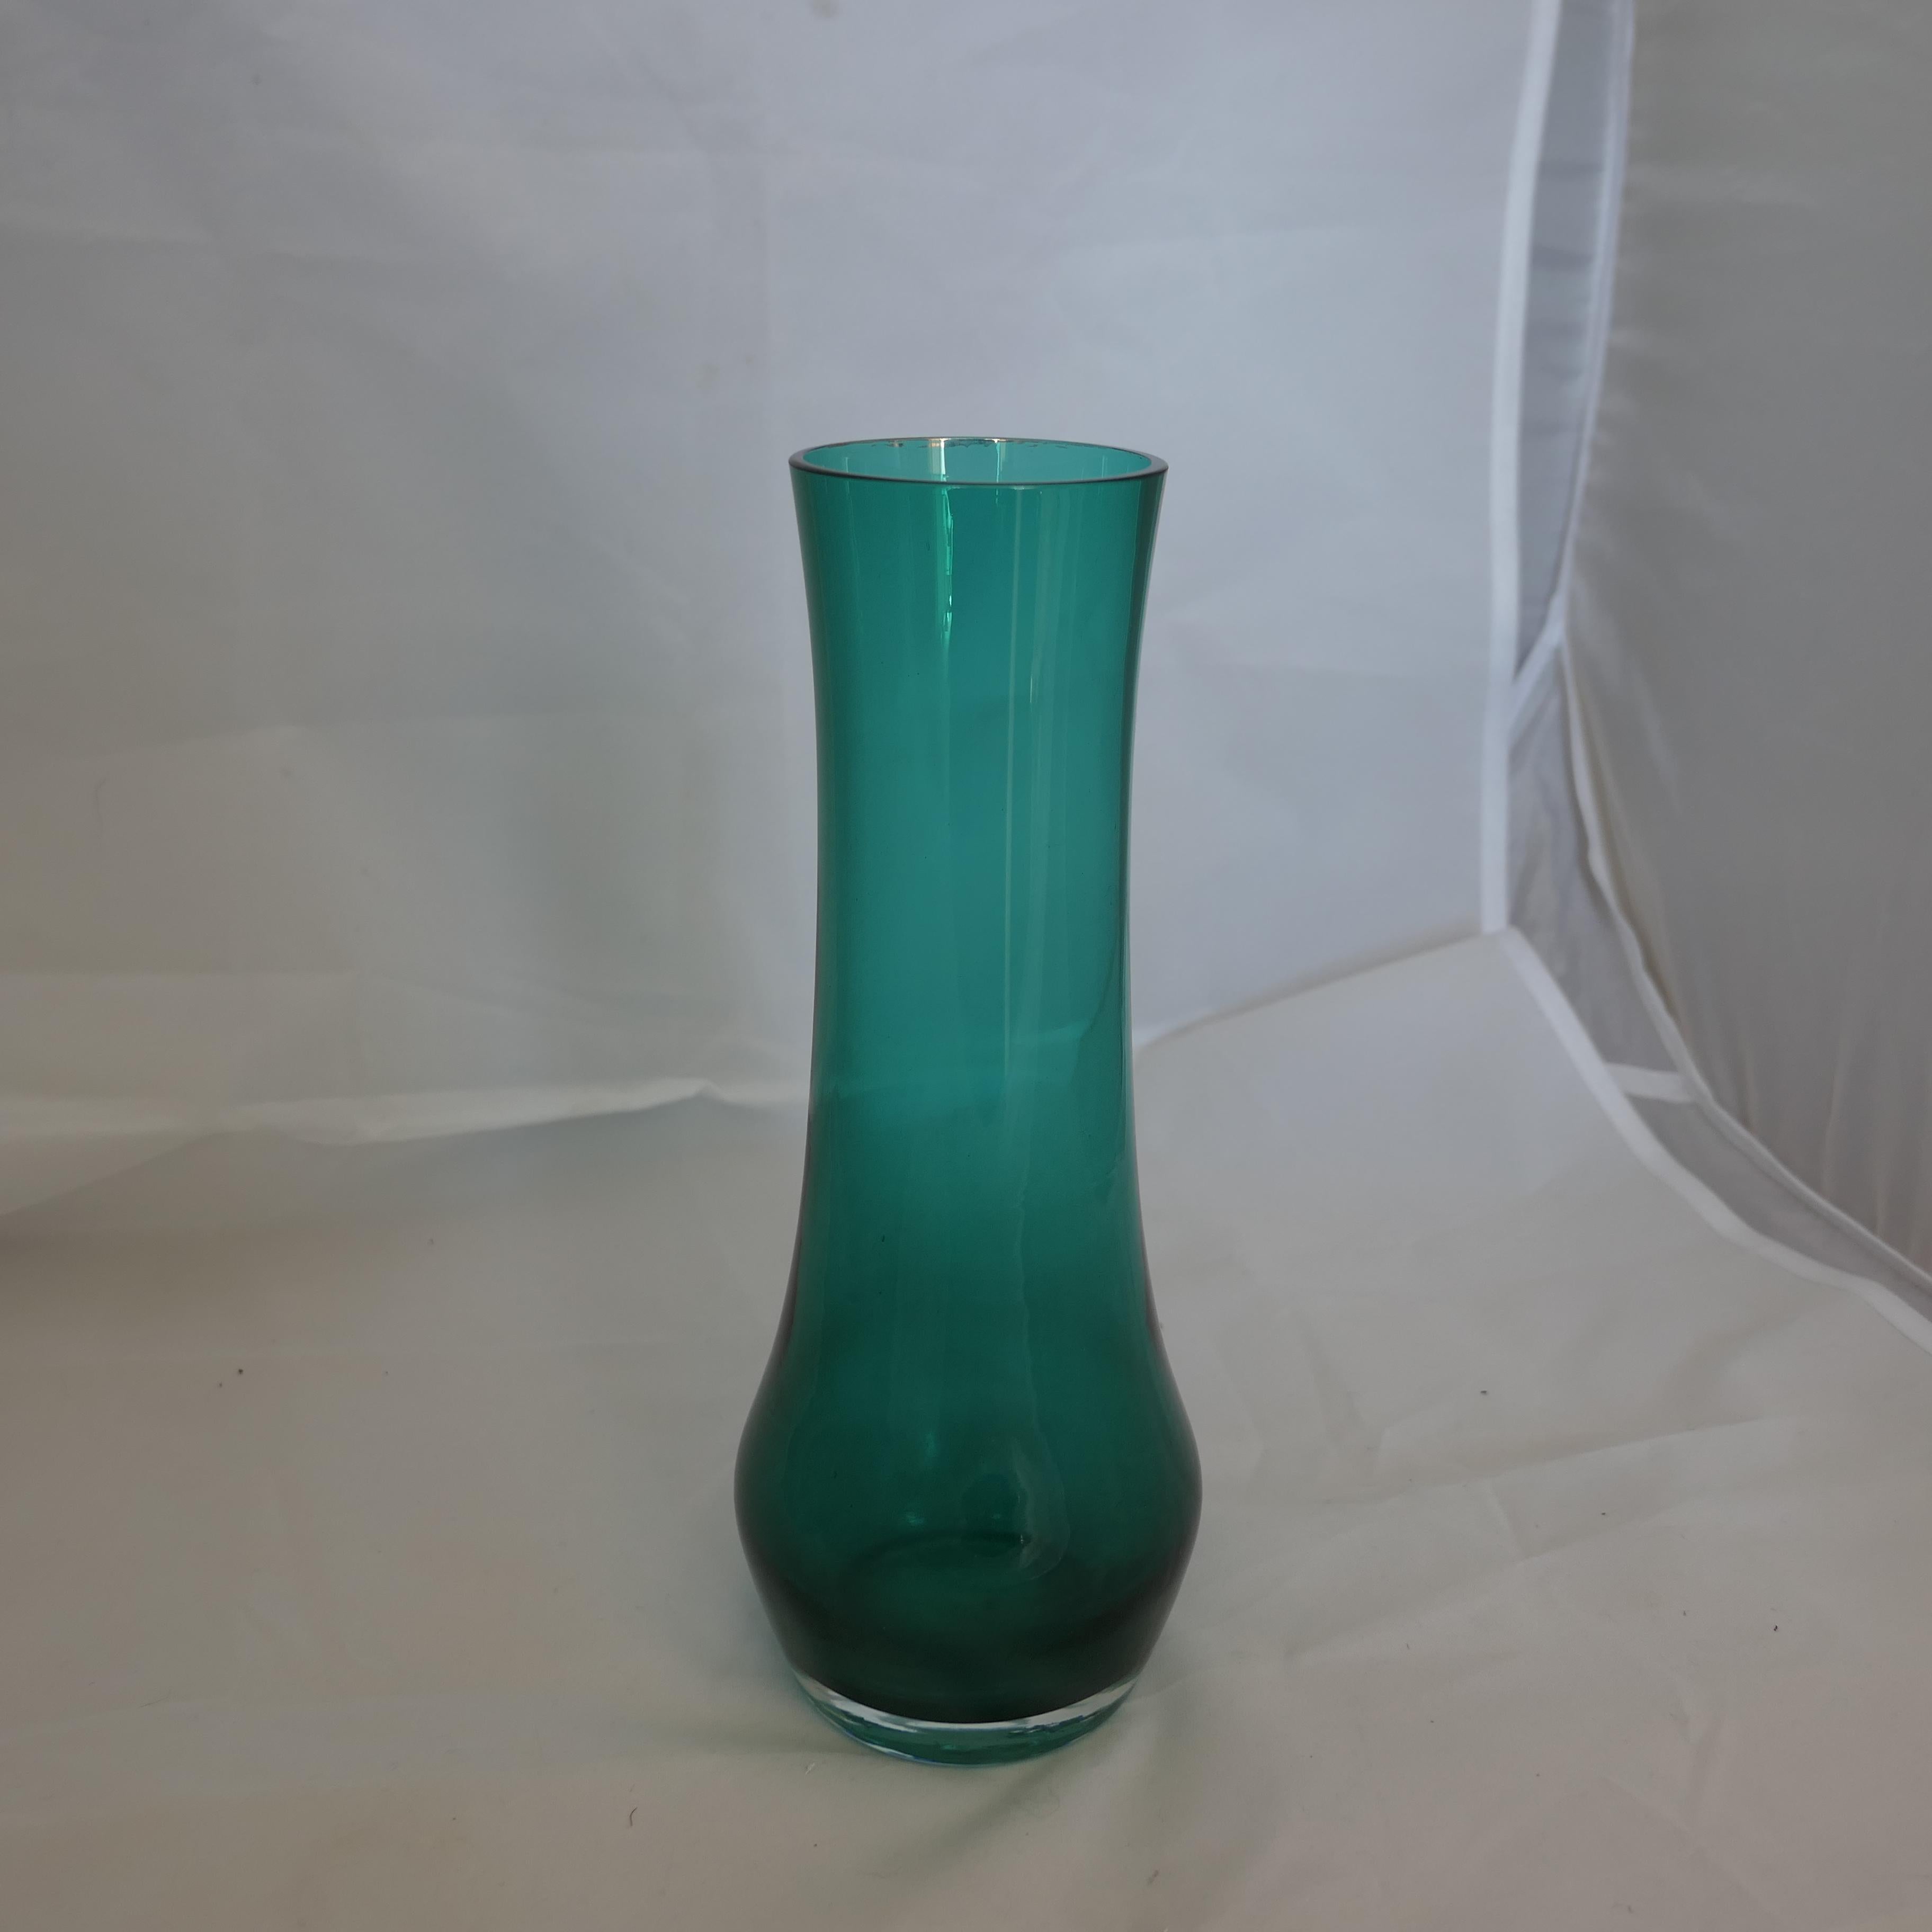 1960s Green Glass Vase by Tamara Aladin for Riihimäen Lasi Oy      In Good Condition For Sale In Chillerton, Isle of Wight